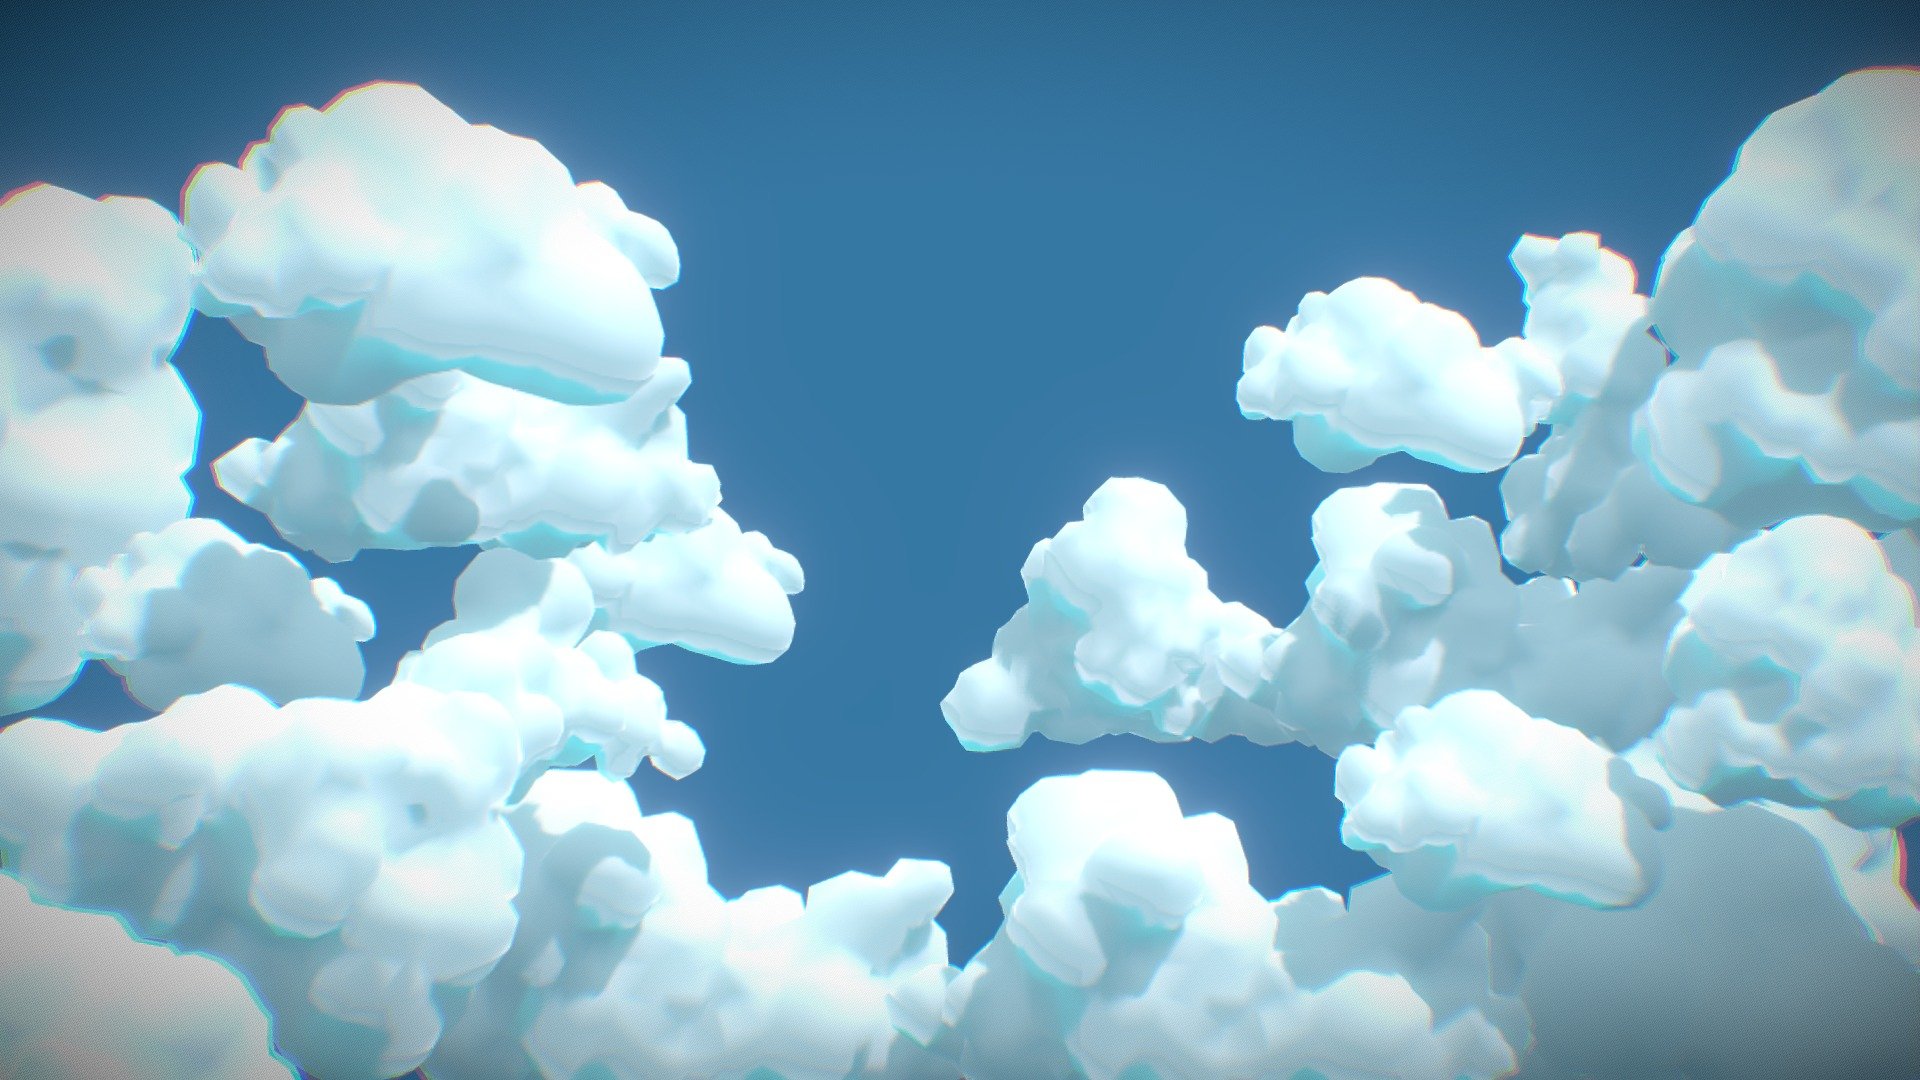 14 clouds with lovely cartoon style for you to freely arrange creatively. Suitable for game, animation, photo projects…
Package includes:





1 FBX file 14136 Tris




With UV, No texture





Clouds cartoon lowpoly - Pack 01: https://sketchfab.com/3d-models/clouds-cartoon-lowpoly-pack-01-354fe9b9eecc48a398d26d69627be41b

Clouds cartoon lowpoly - Pack 02: https://sketchfab.com/3d-models/clouds-cartoon-lowoly-pack-02-6ebc4ba58cda42b5b8b0950ae81e431c



Contact me for support. Hope to receive feedback from everyone. Thank - Clouds cartoon lowpoly - Pack 03 - Buy Royalty Free 3D model by DuNguyn - Assets store (@nguyenvuduc2000) 3d model